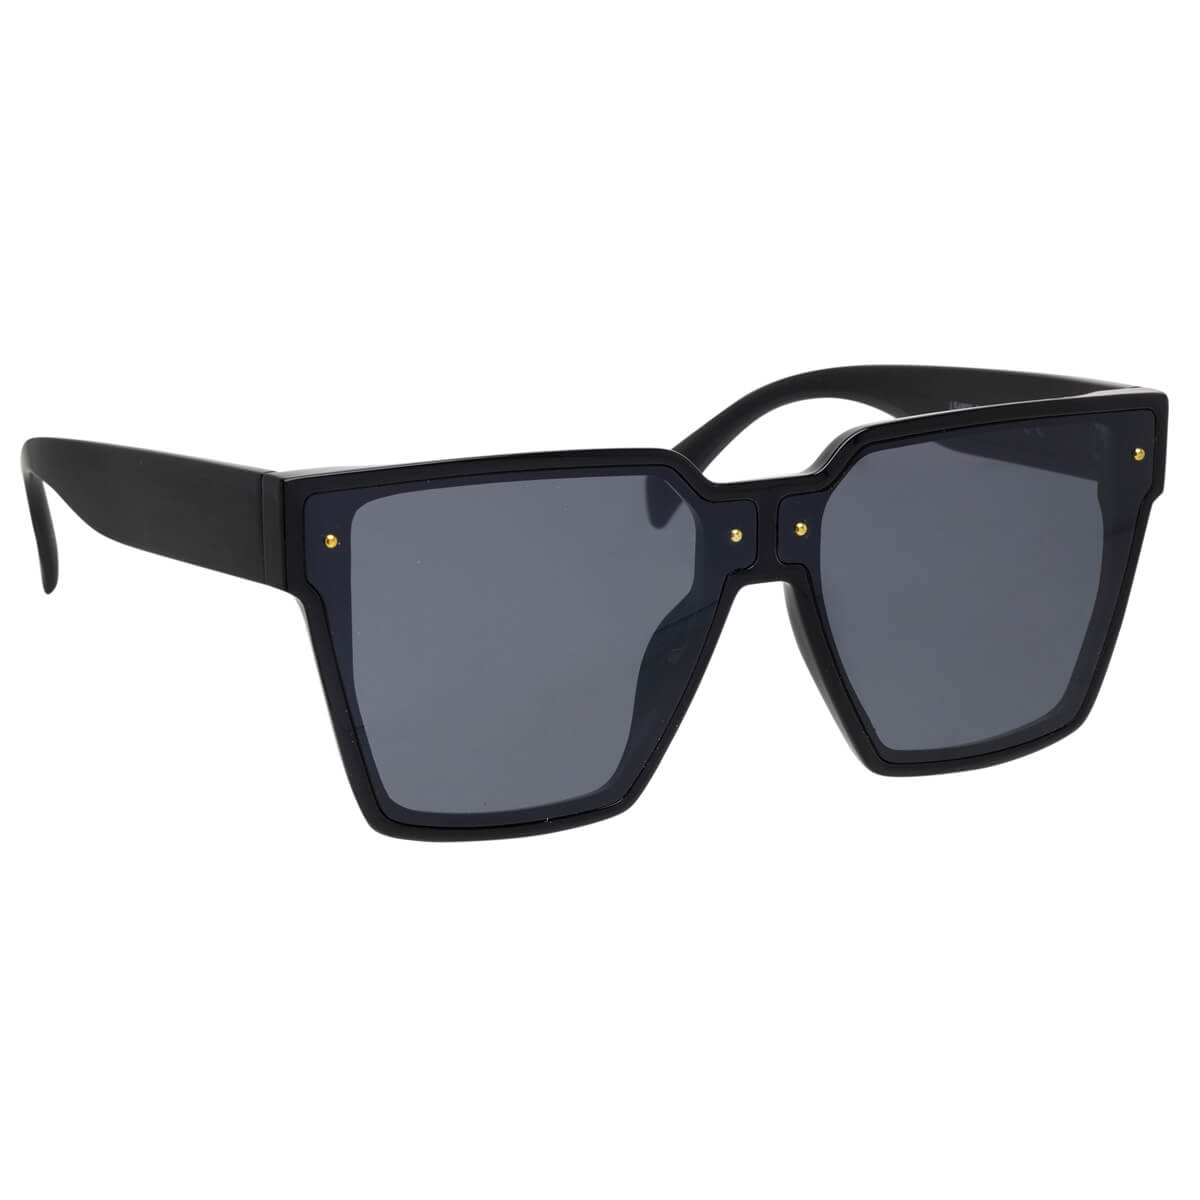 Large angled sunglasses with rivets